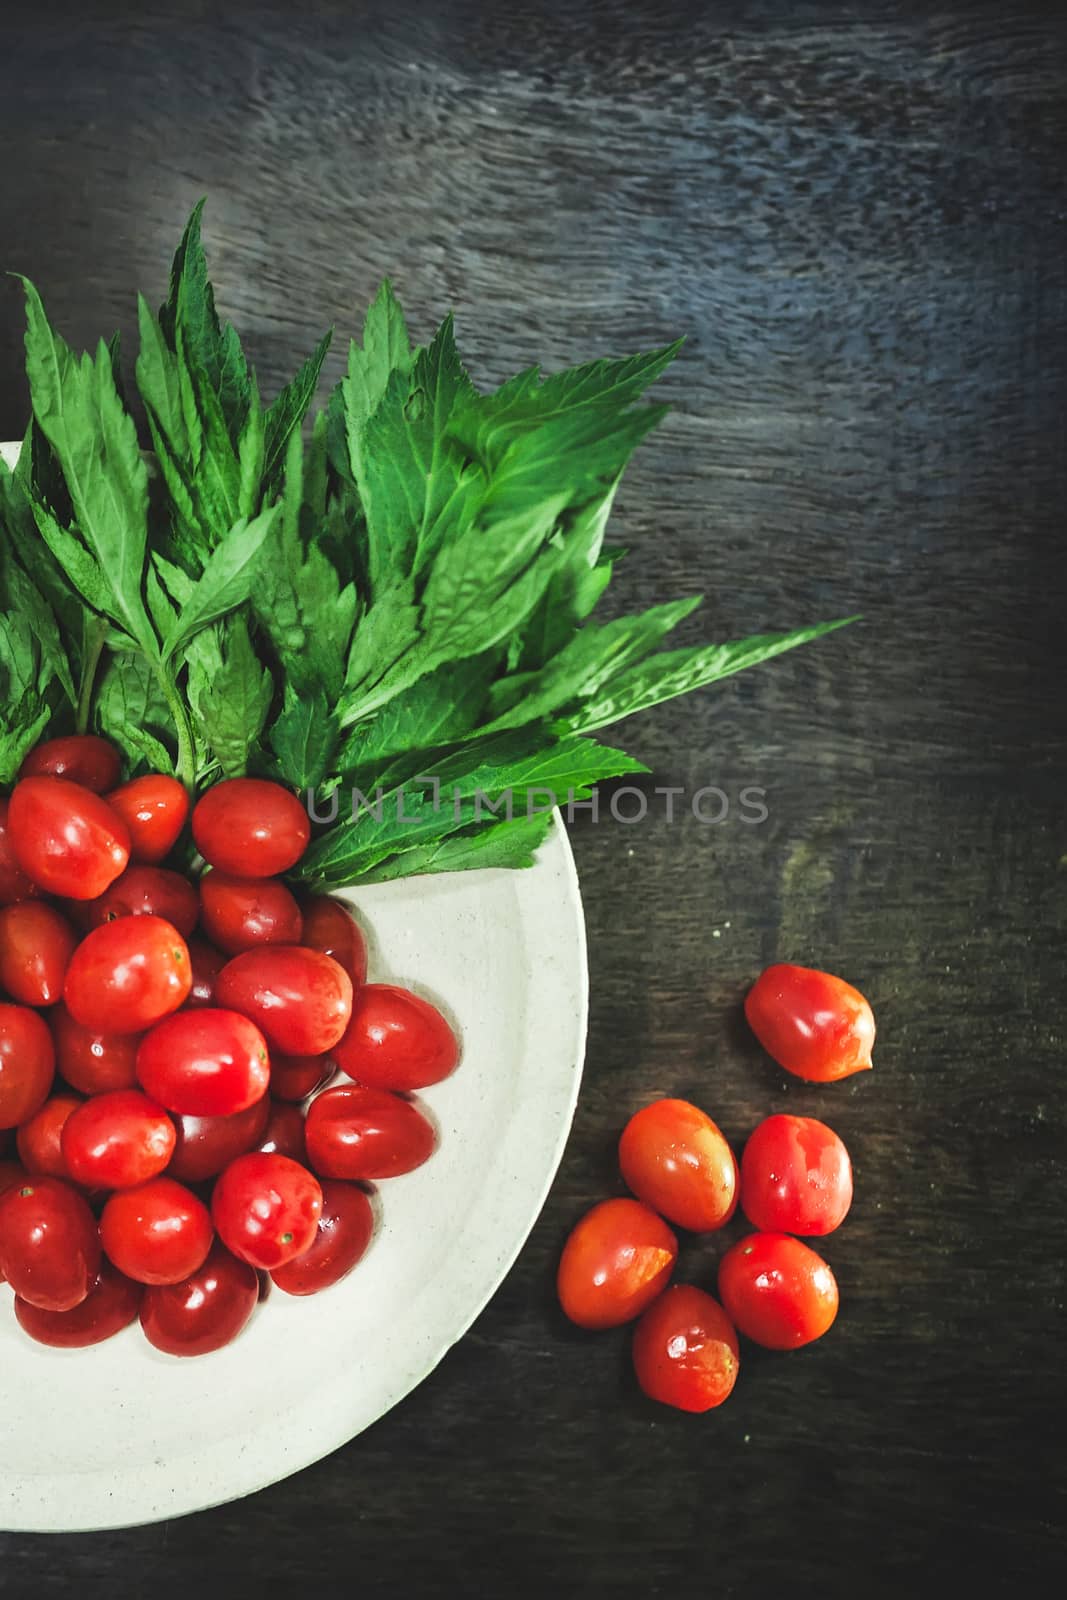 Small tomatoes and green vegetable on rustic black wooden background.